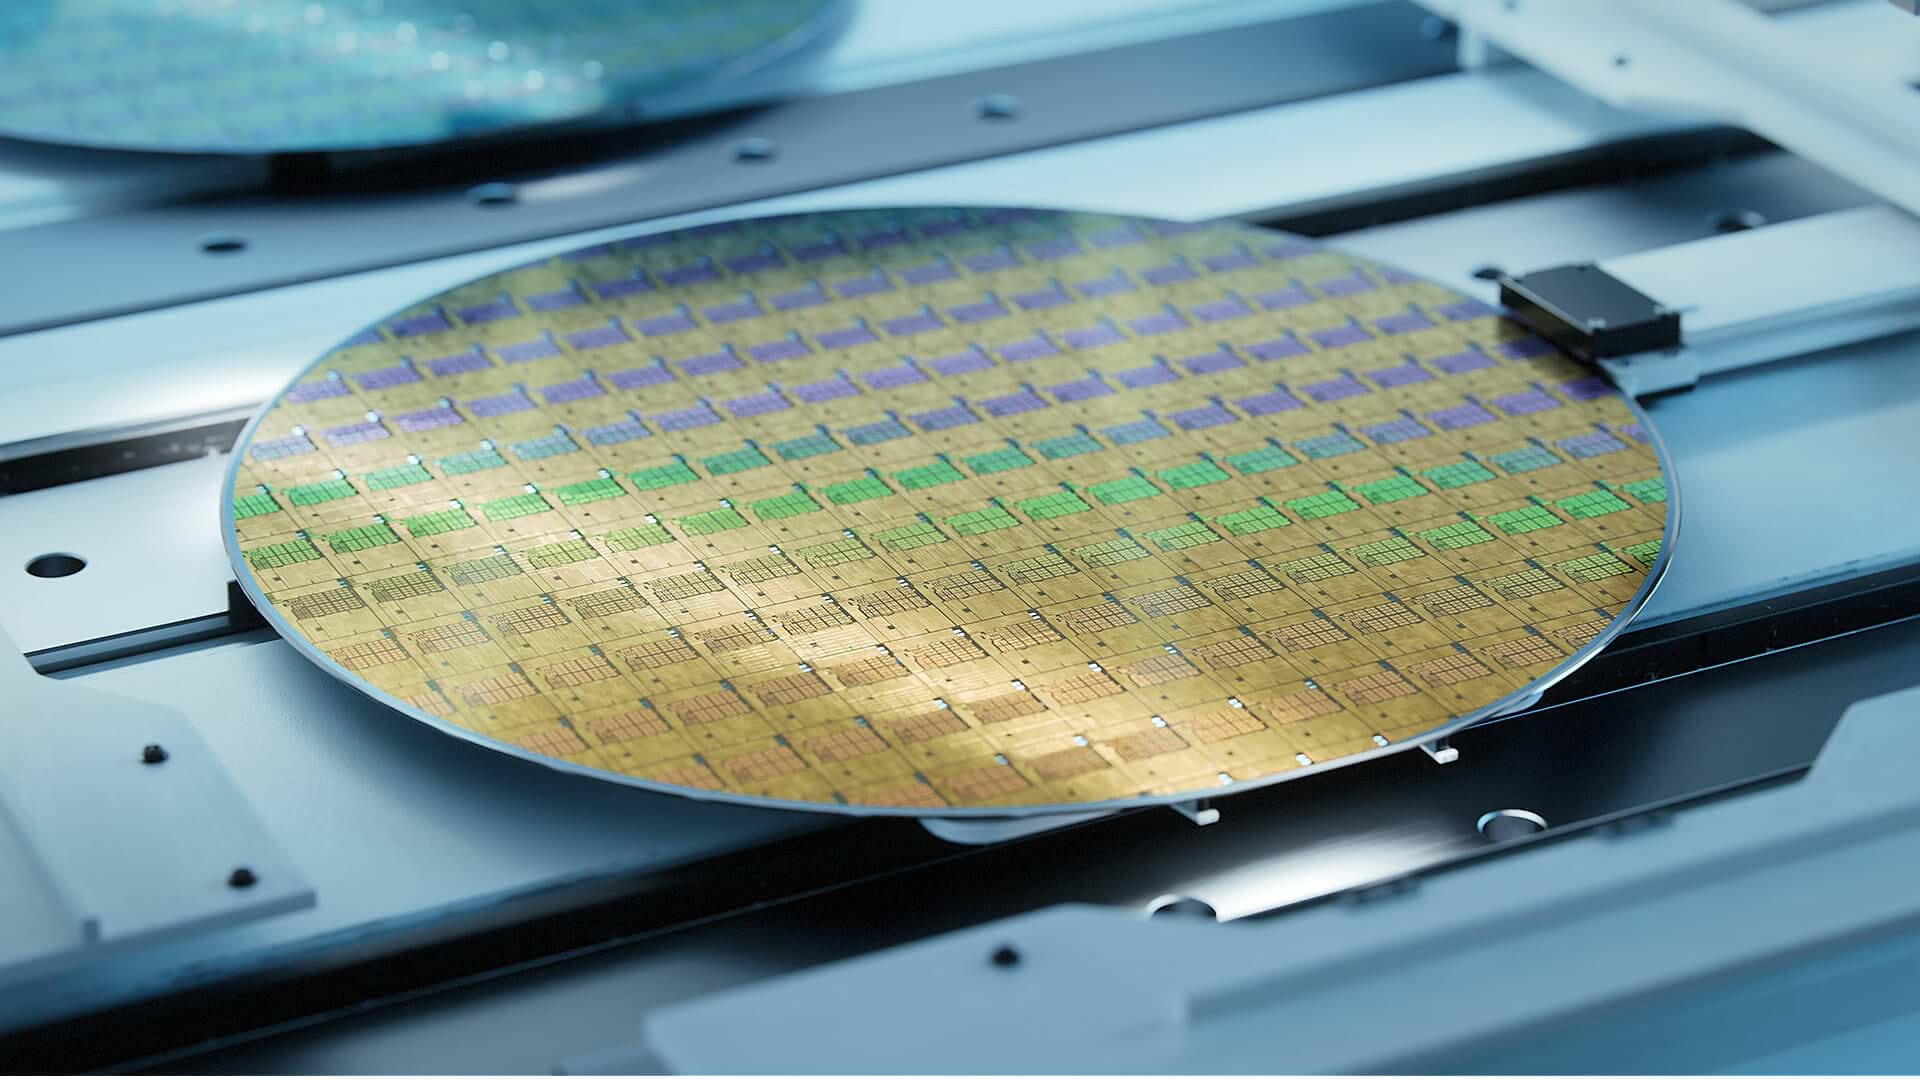 Semiconductor production produces round wafers